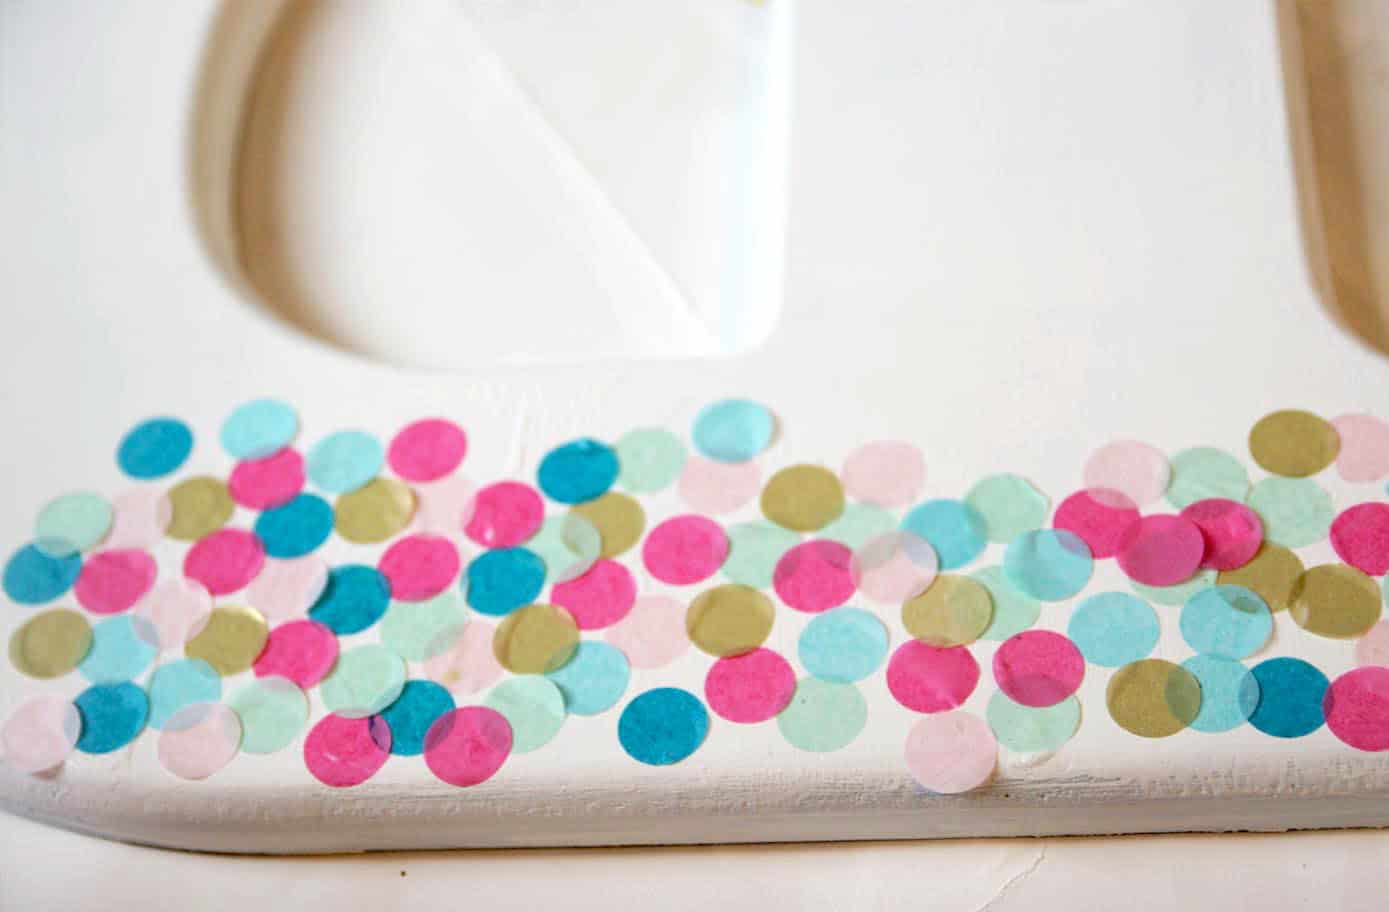 Learn how to make decorative letters using confetti and Mod Podge! This project is perfect for a kids